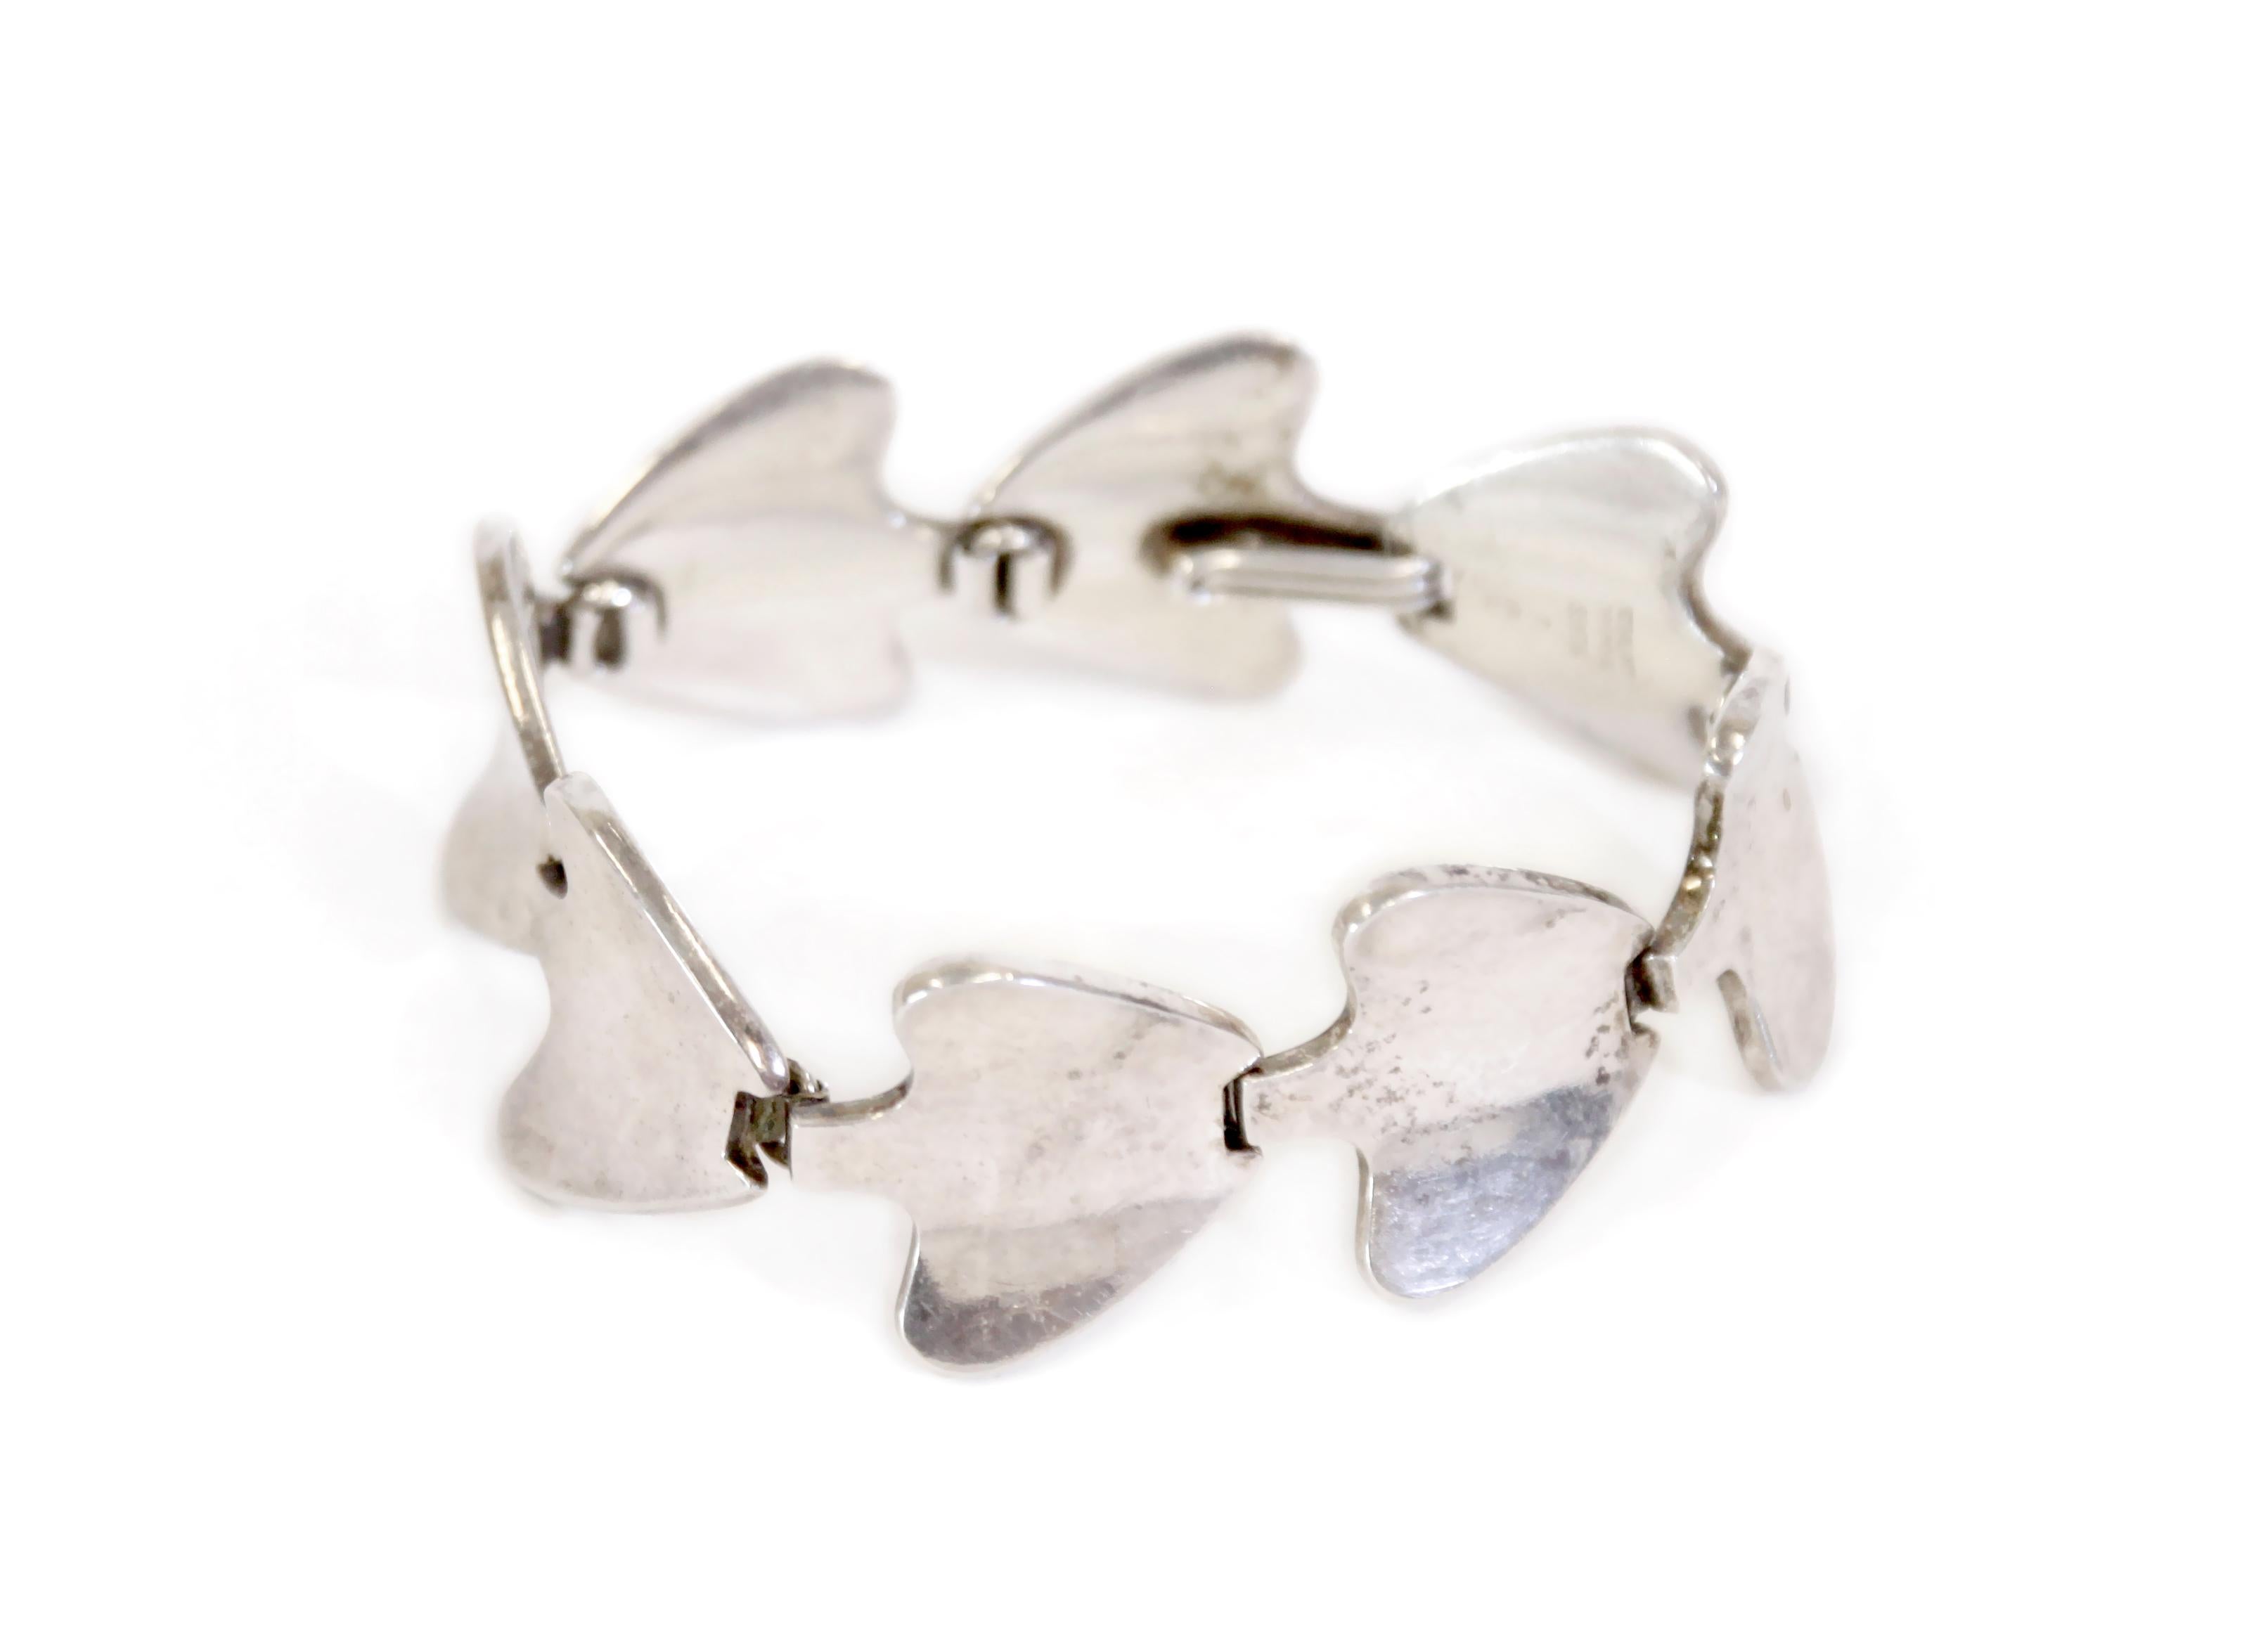 Organic and decorative link bracelet in heavy silver. Designed and made in Denmark by Bent Knutsen. The bracelet in in very good condition with all elements in full working order. 